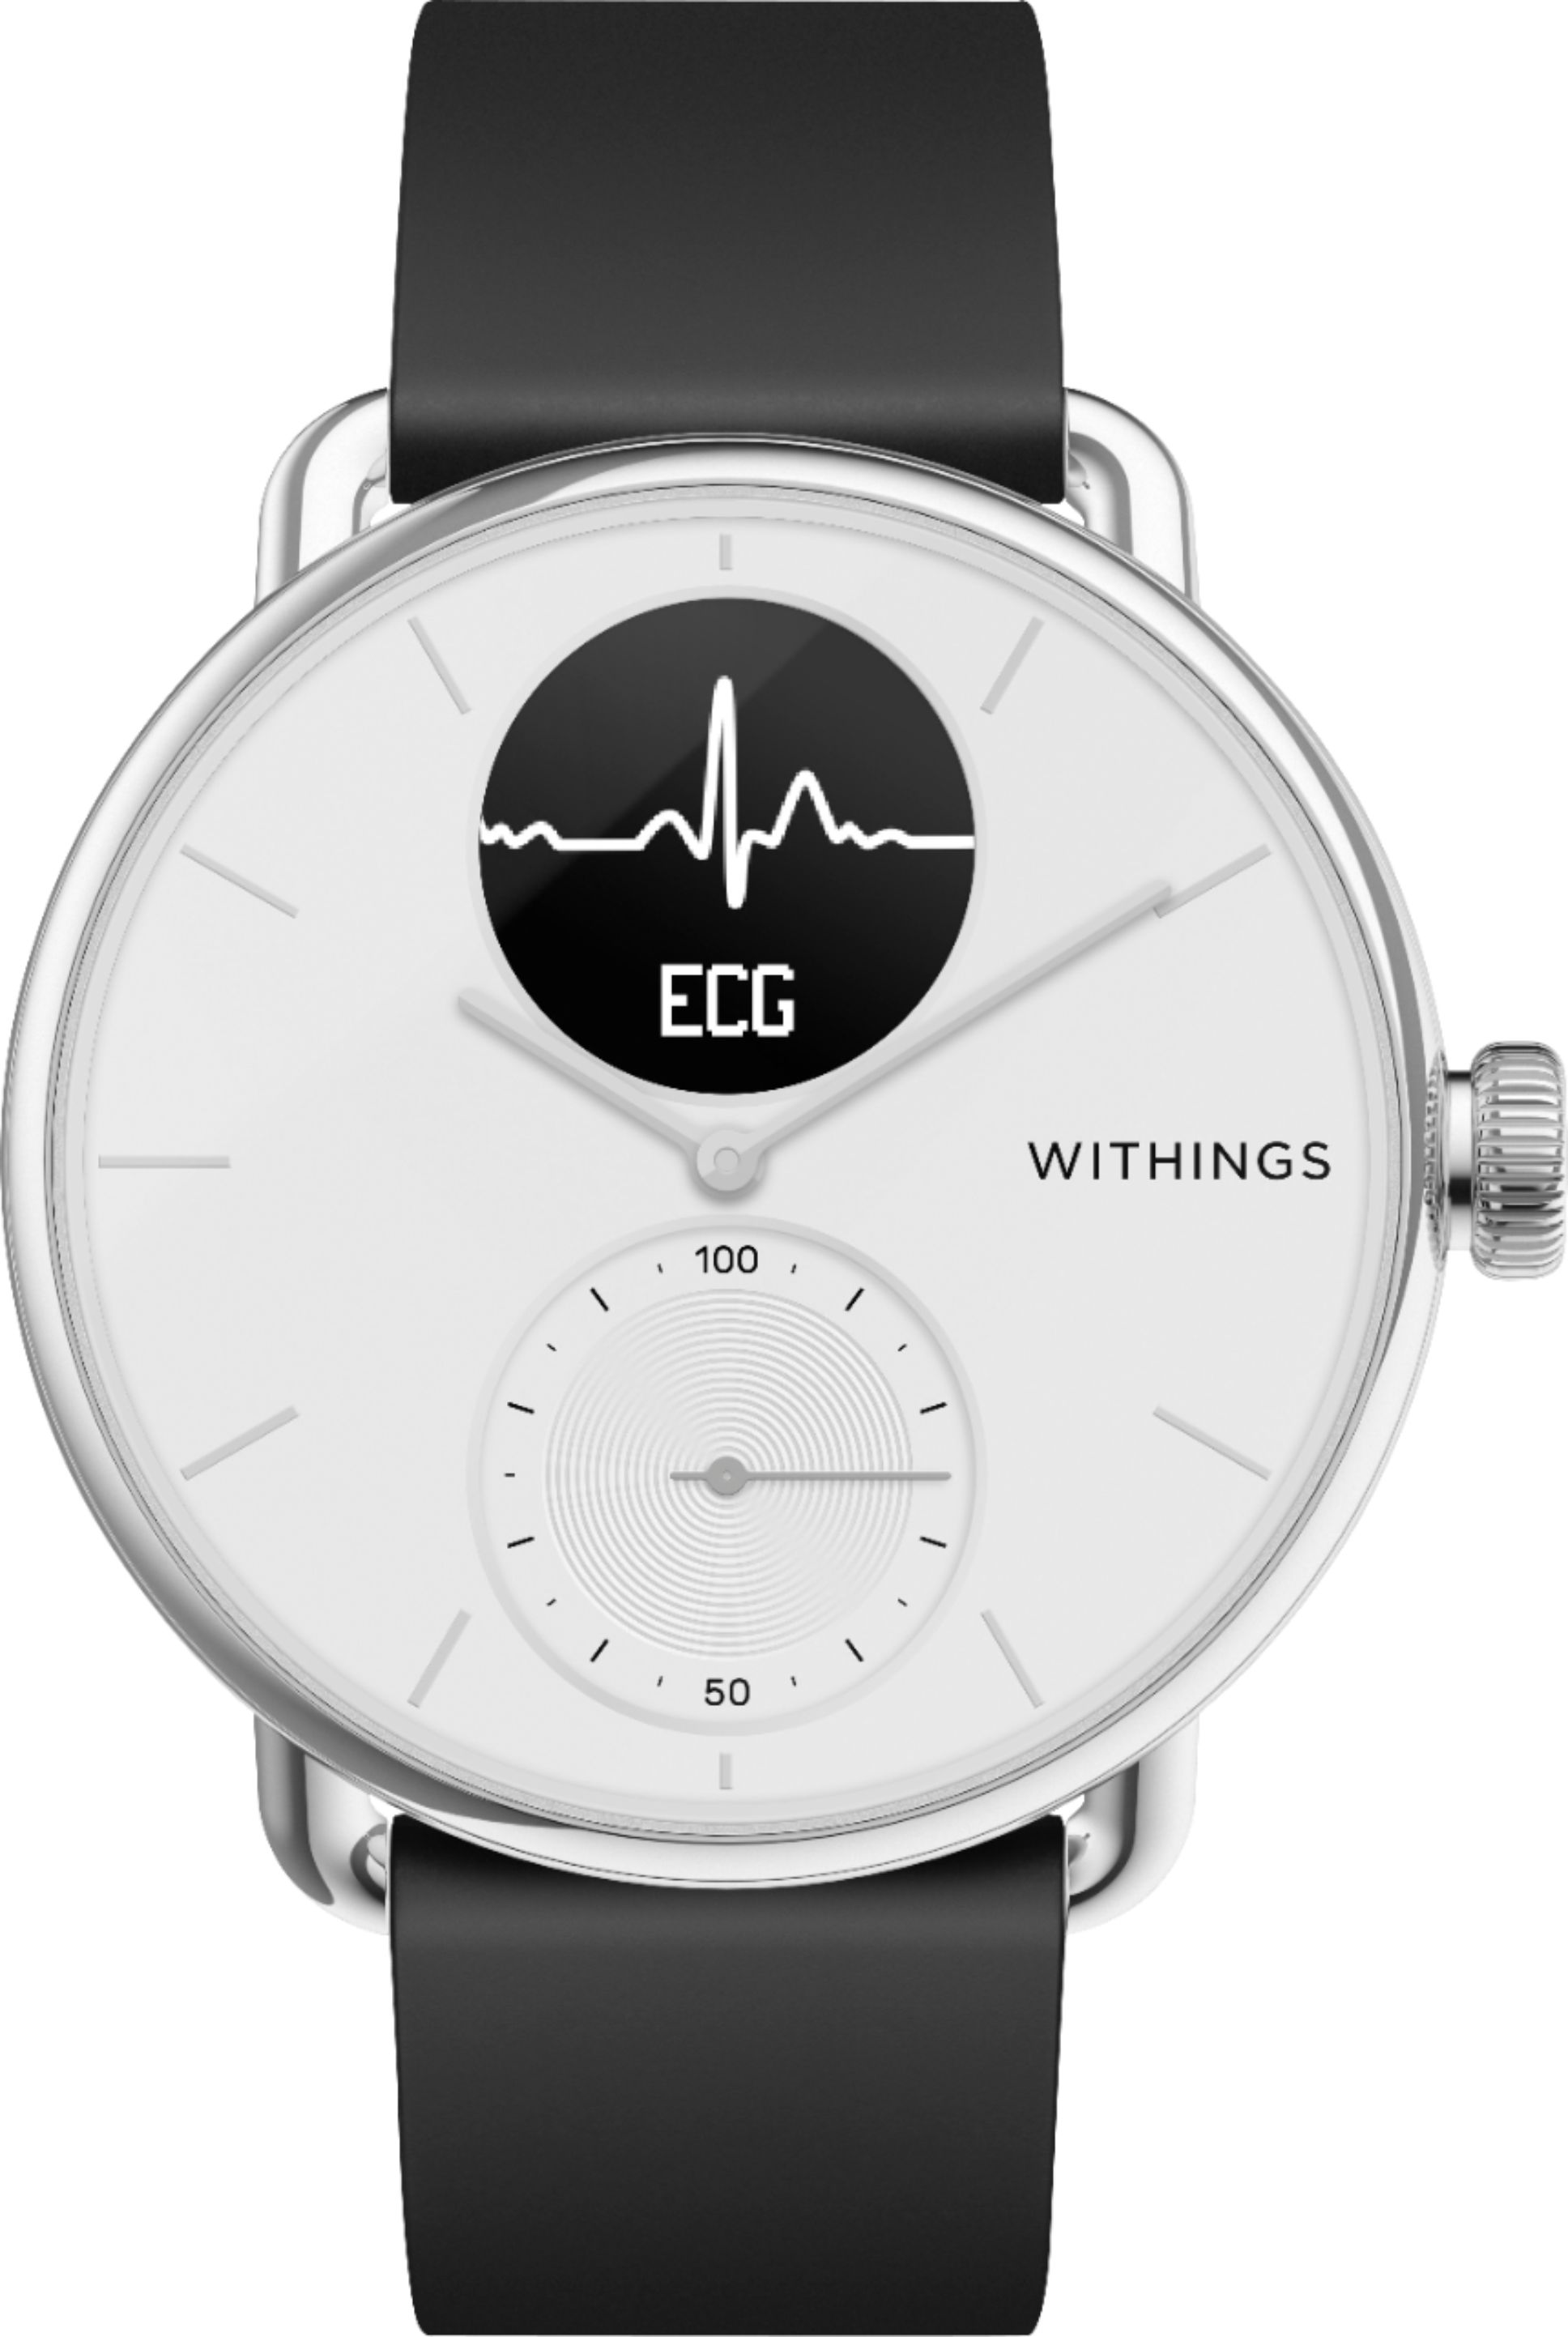 Withings - SCANWATCH - Hybrid Smartwatch with ECG, heart rate and oximeter - 38mm white - White